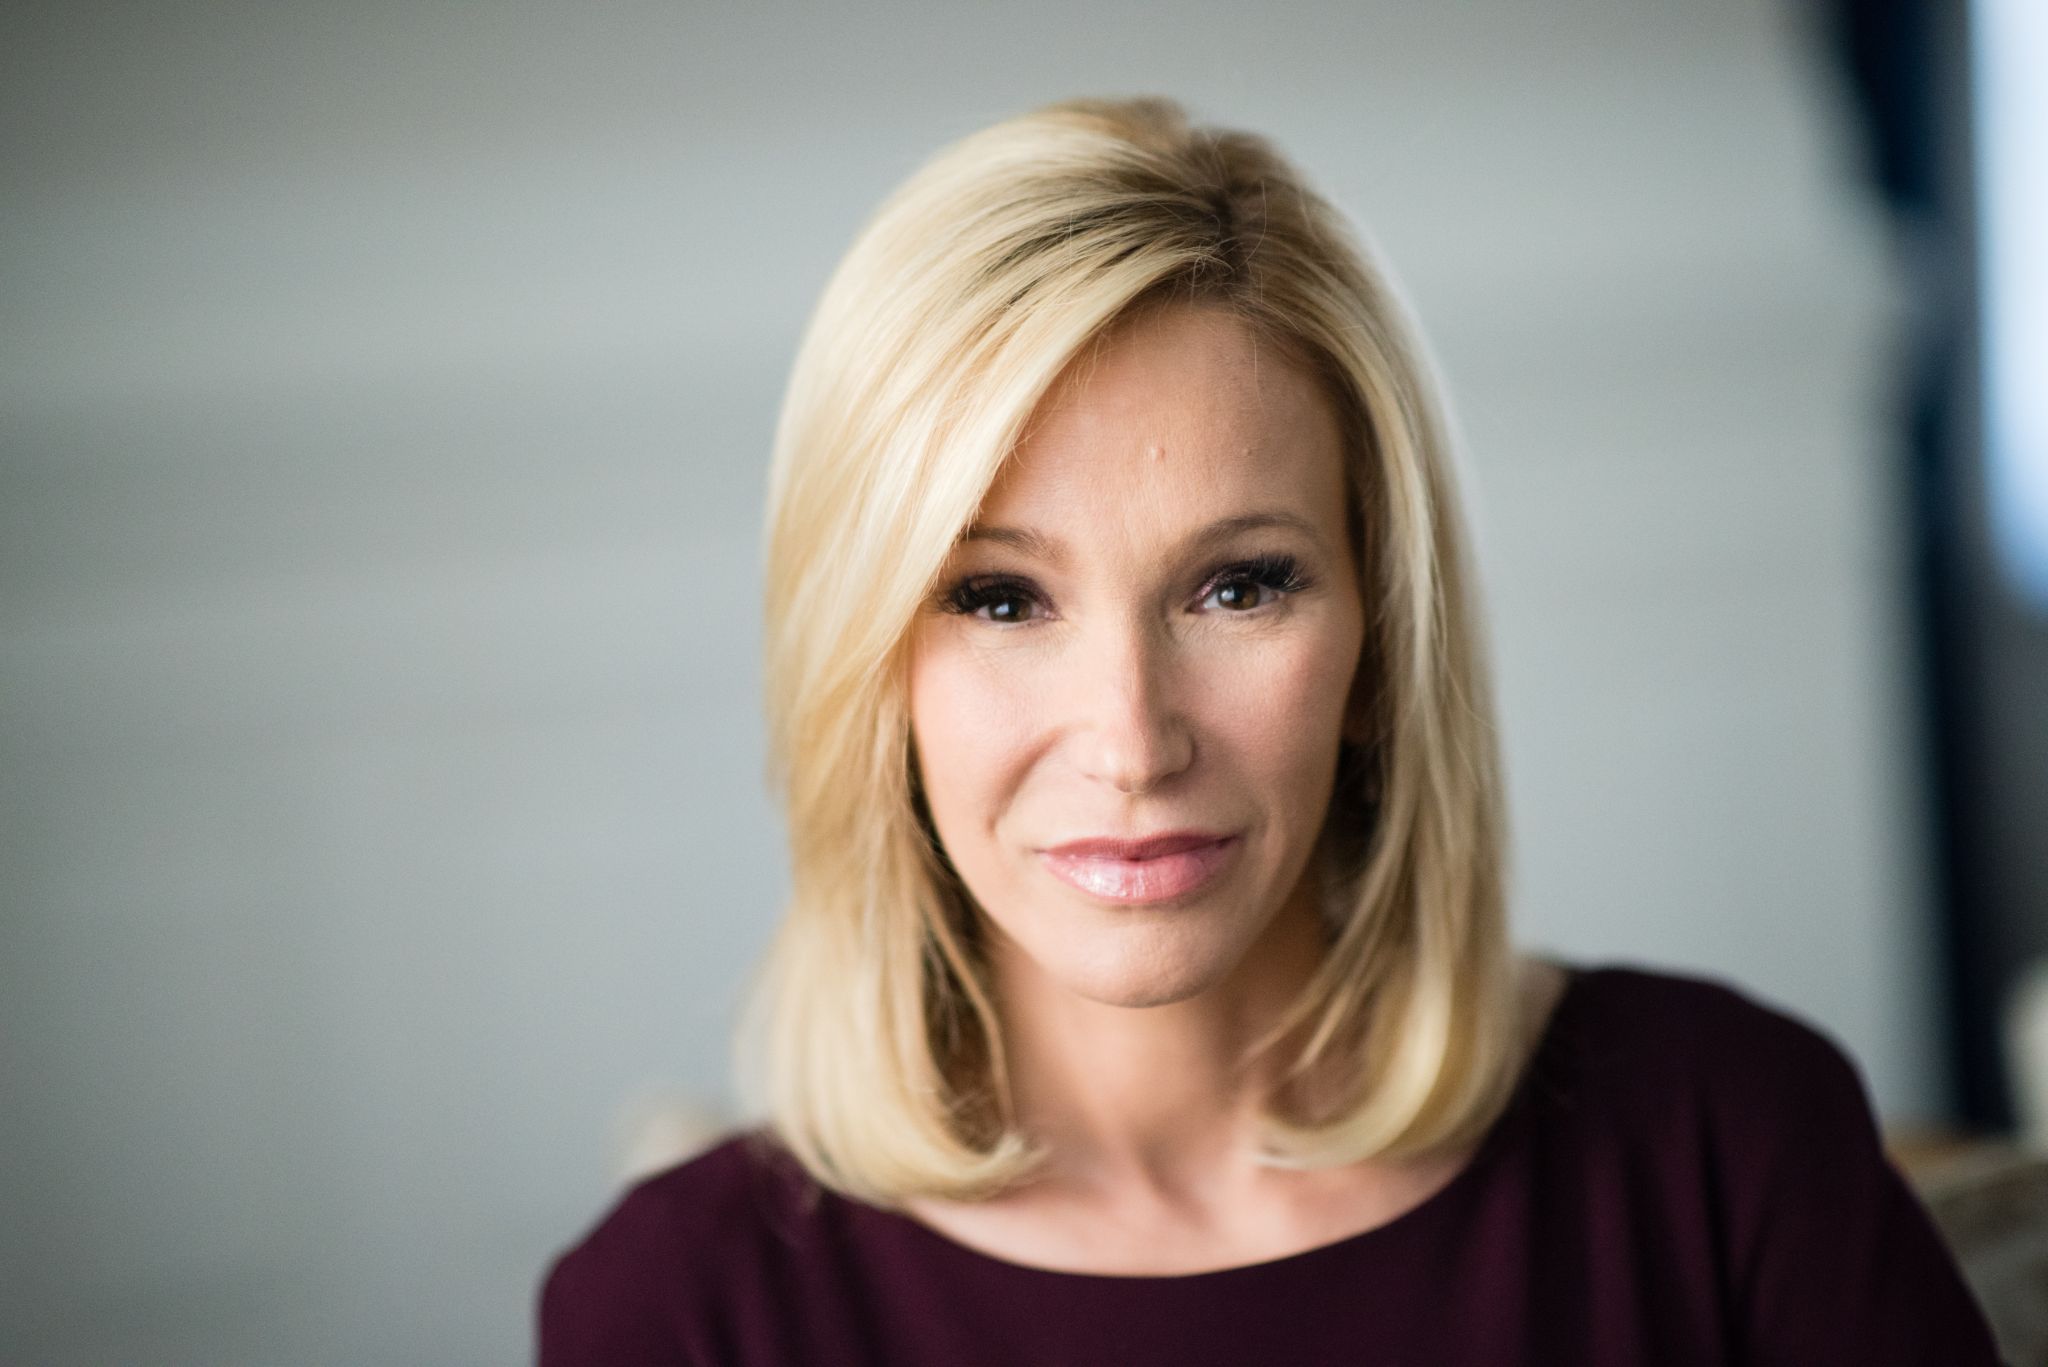 Pastor Paula White Wants Followers To Send Her A Months Worth Of Pay